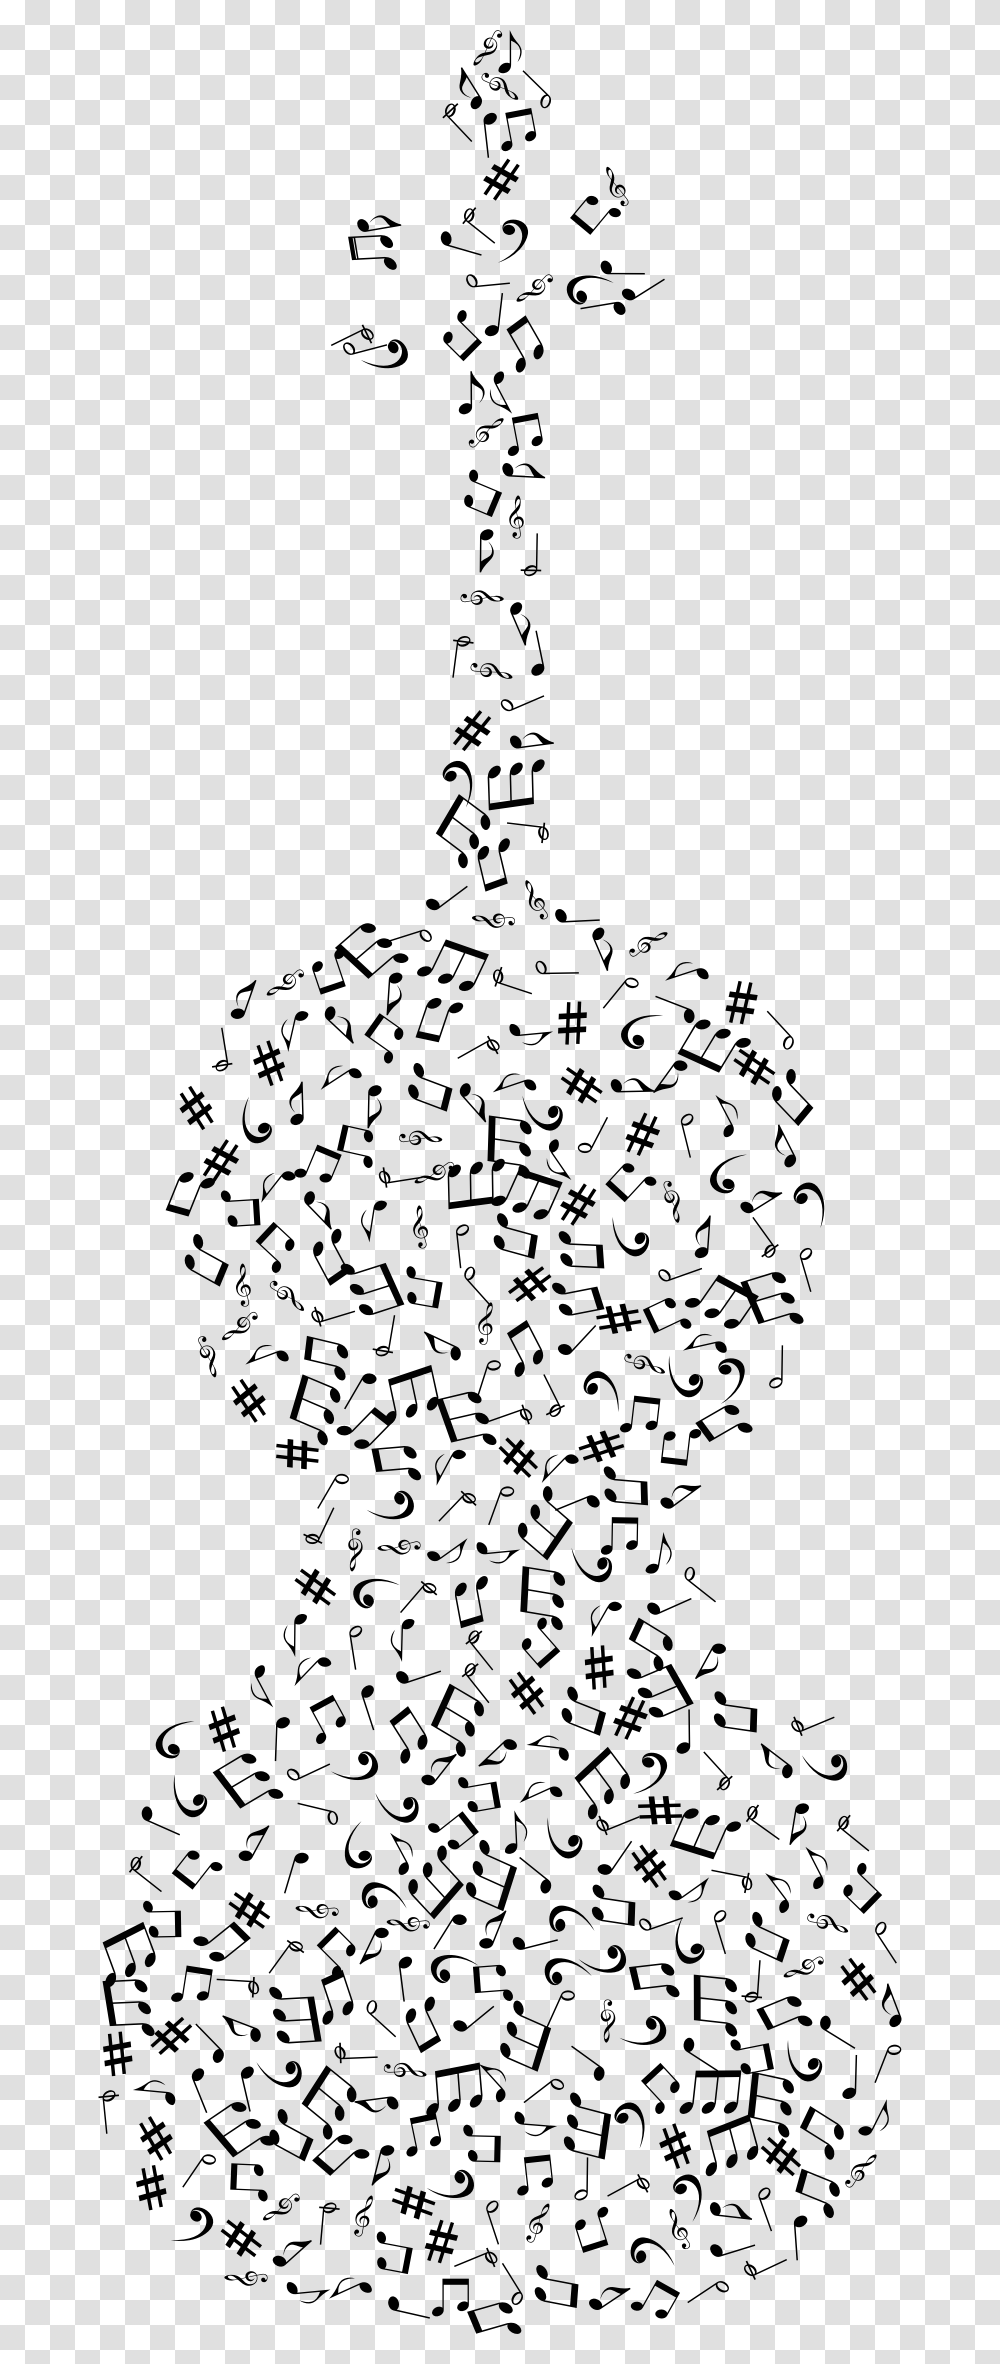 Musical Violin Clip Arts Violin And Music Notes Art, Nature, Outdoors, Astronomy, Night Transparent Png